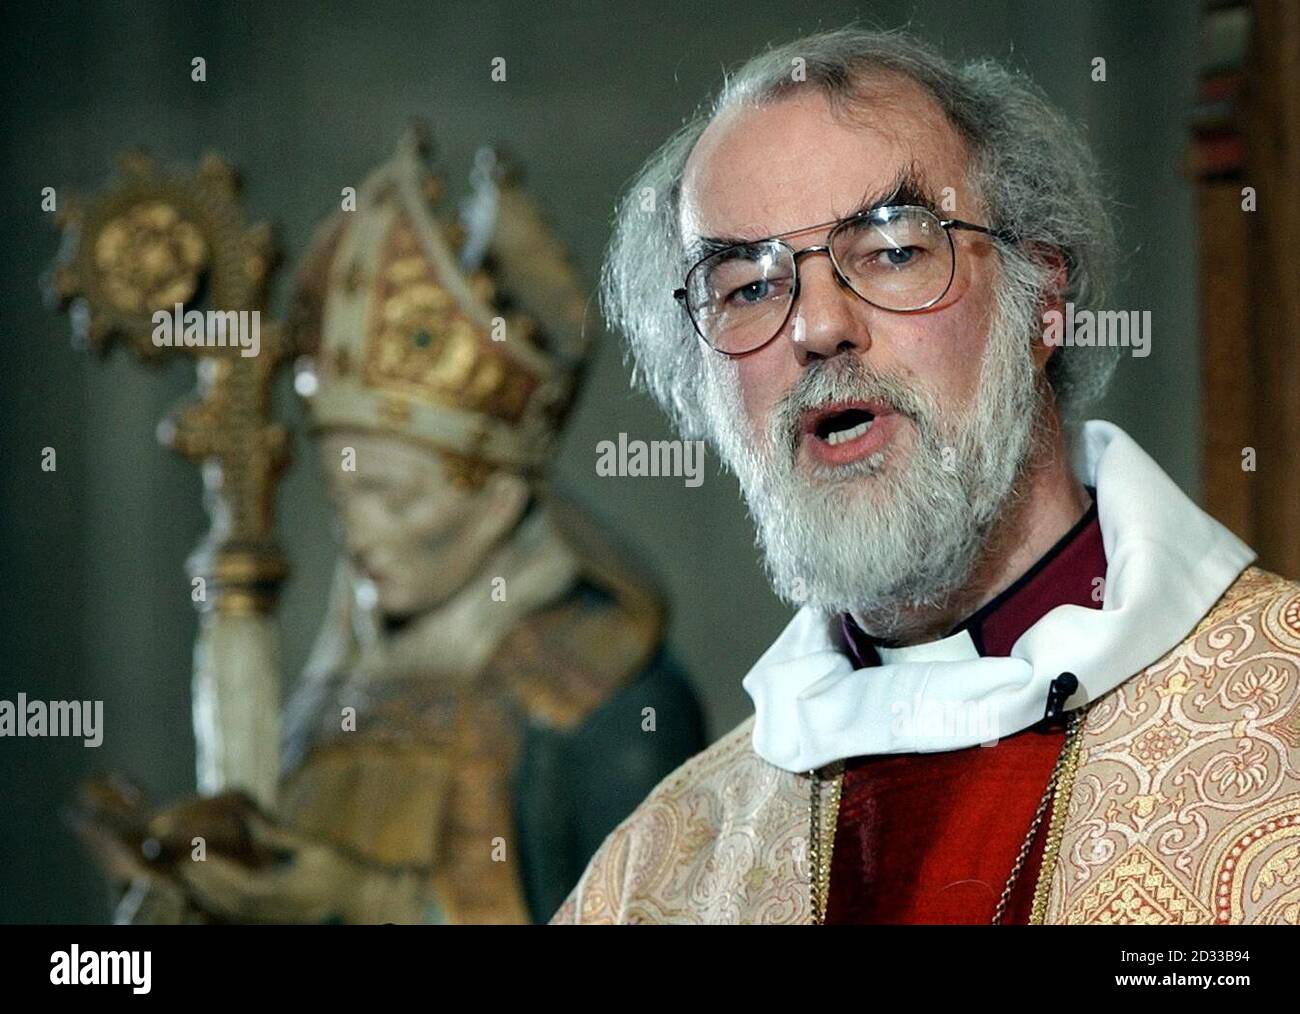 Archbishop of Canterbury Dr Rowan Williams delivers his Christmas sermon, during a service at Canterbury Catherdral.  Where he urged Christians, Jews and Muslims to stand together as he delivered his annual Christmas sermon. Stock Photo